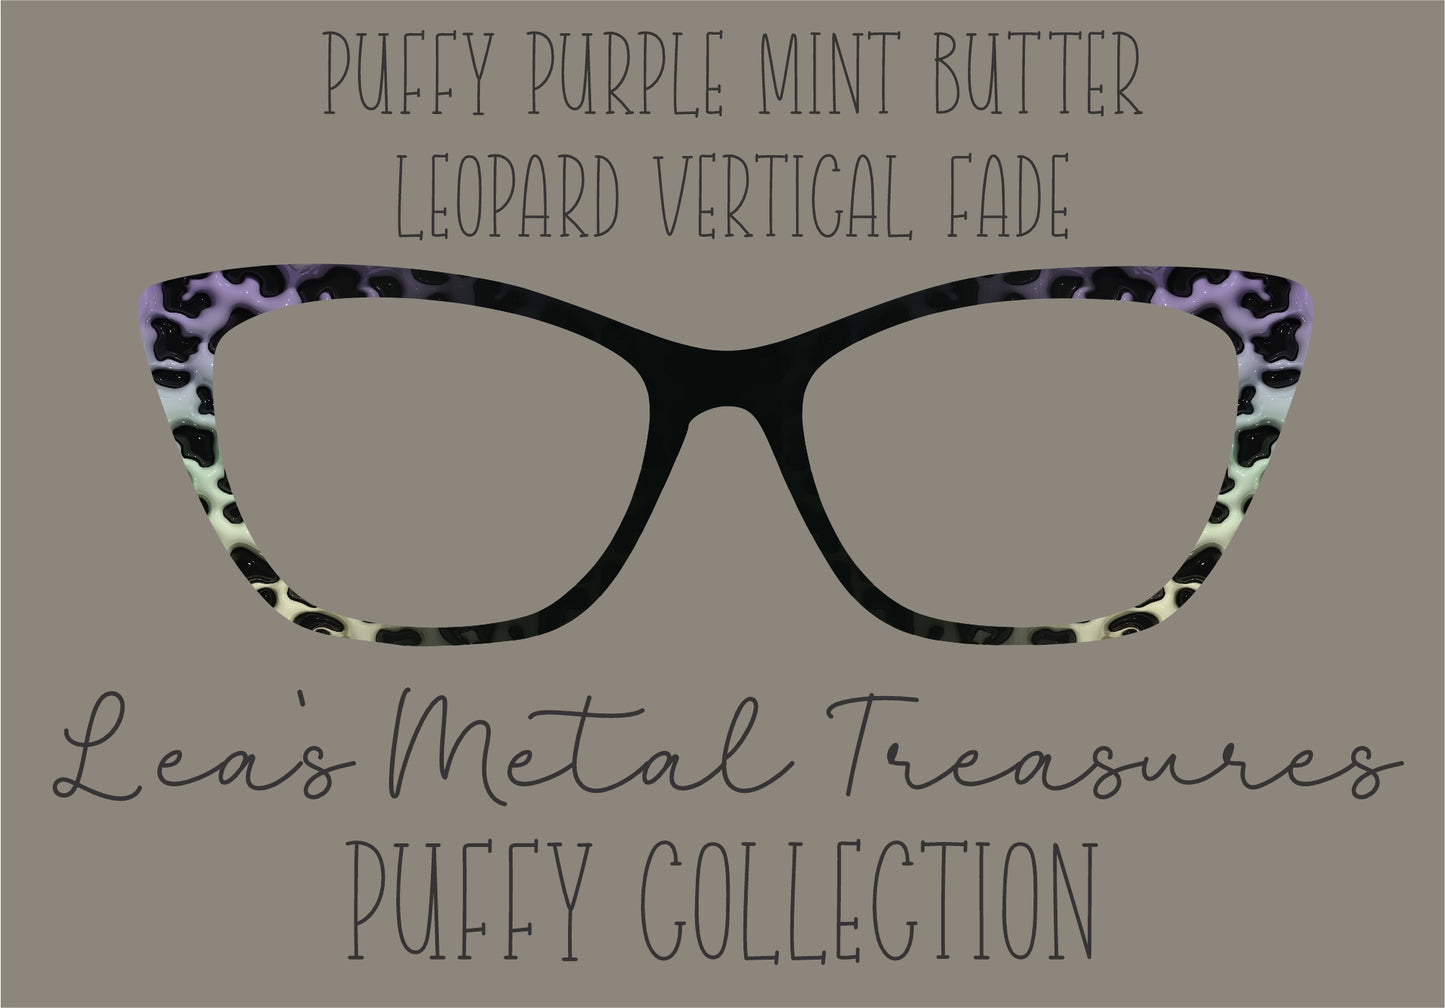 PUFFY PURPLE MINT BUTTER LEOPARD VERTICAL FADE Eyewear Frame Toppers COMES WITH MAGNETS